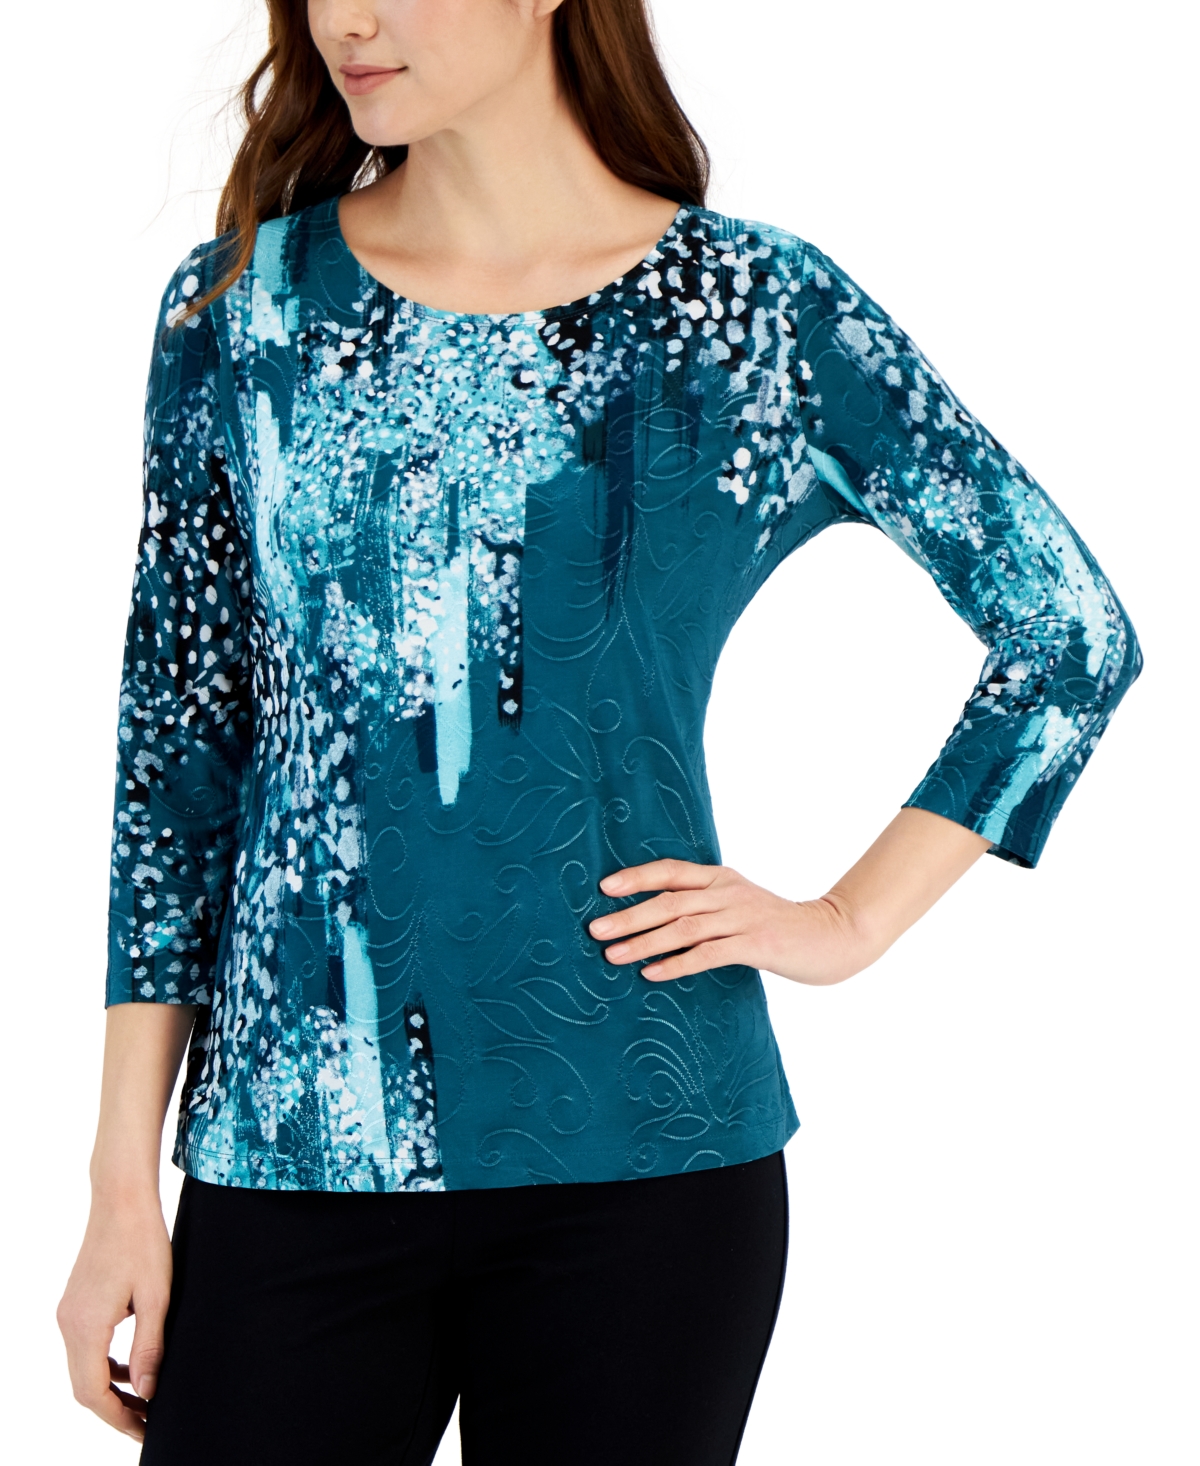 Jm Collection Plus Size Printed 3/4-sleeve Top, Created For Macy's